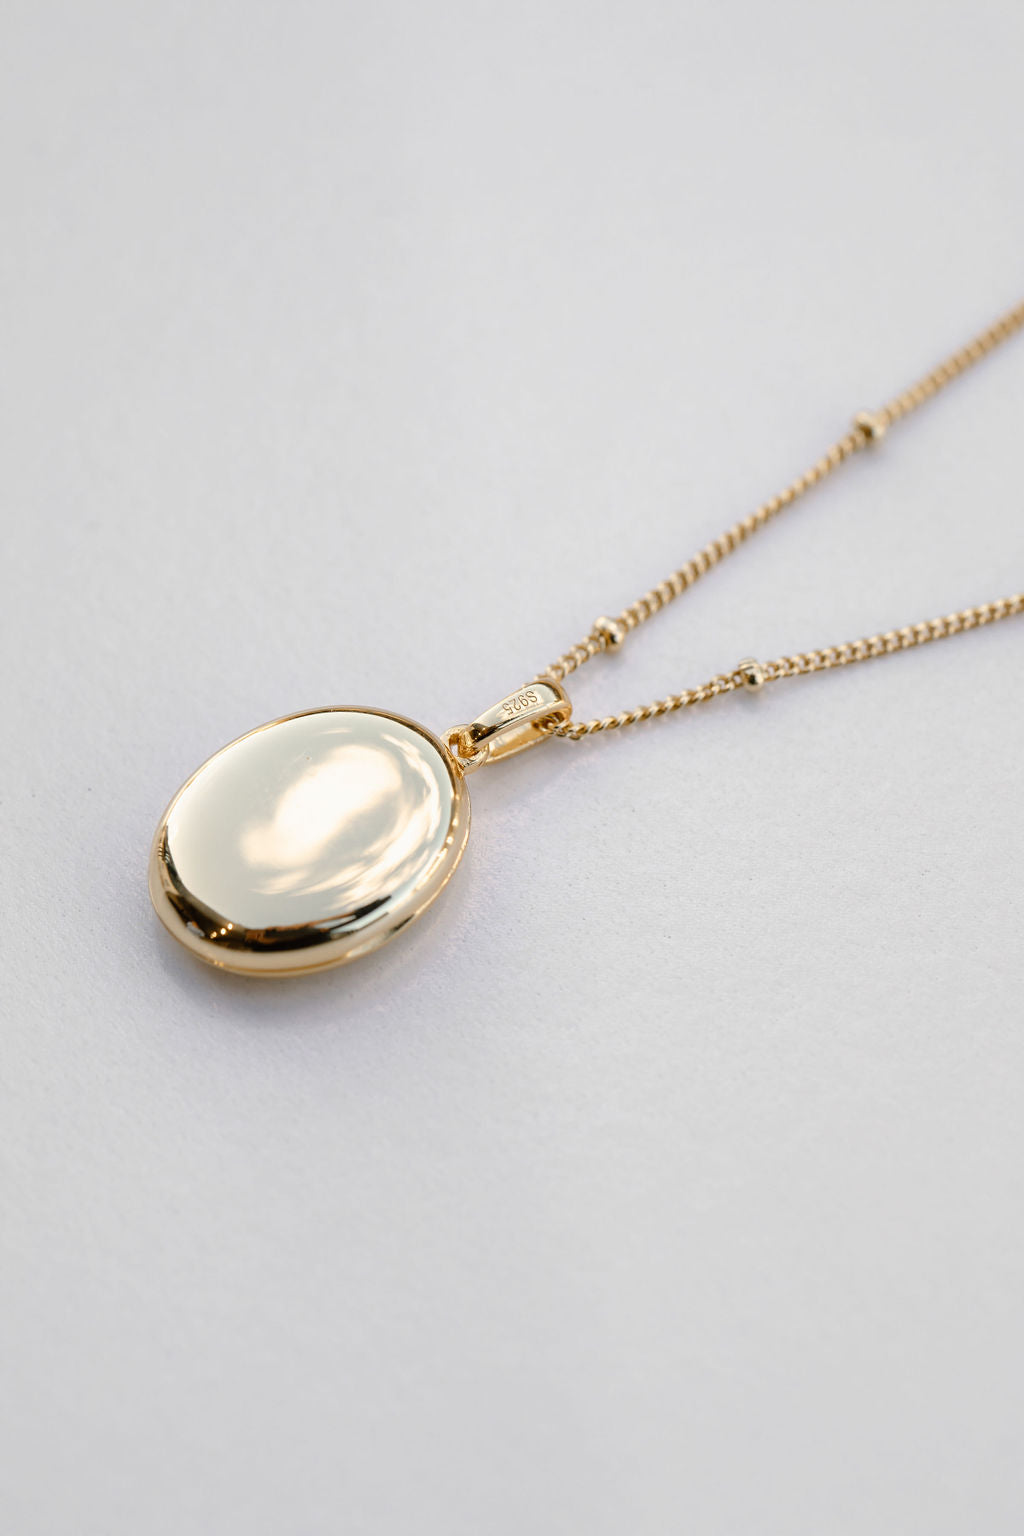 gold oval locket on bead chain necklace